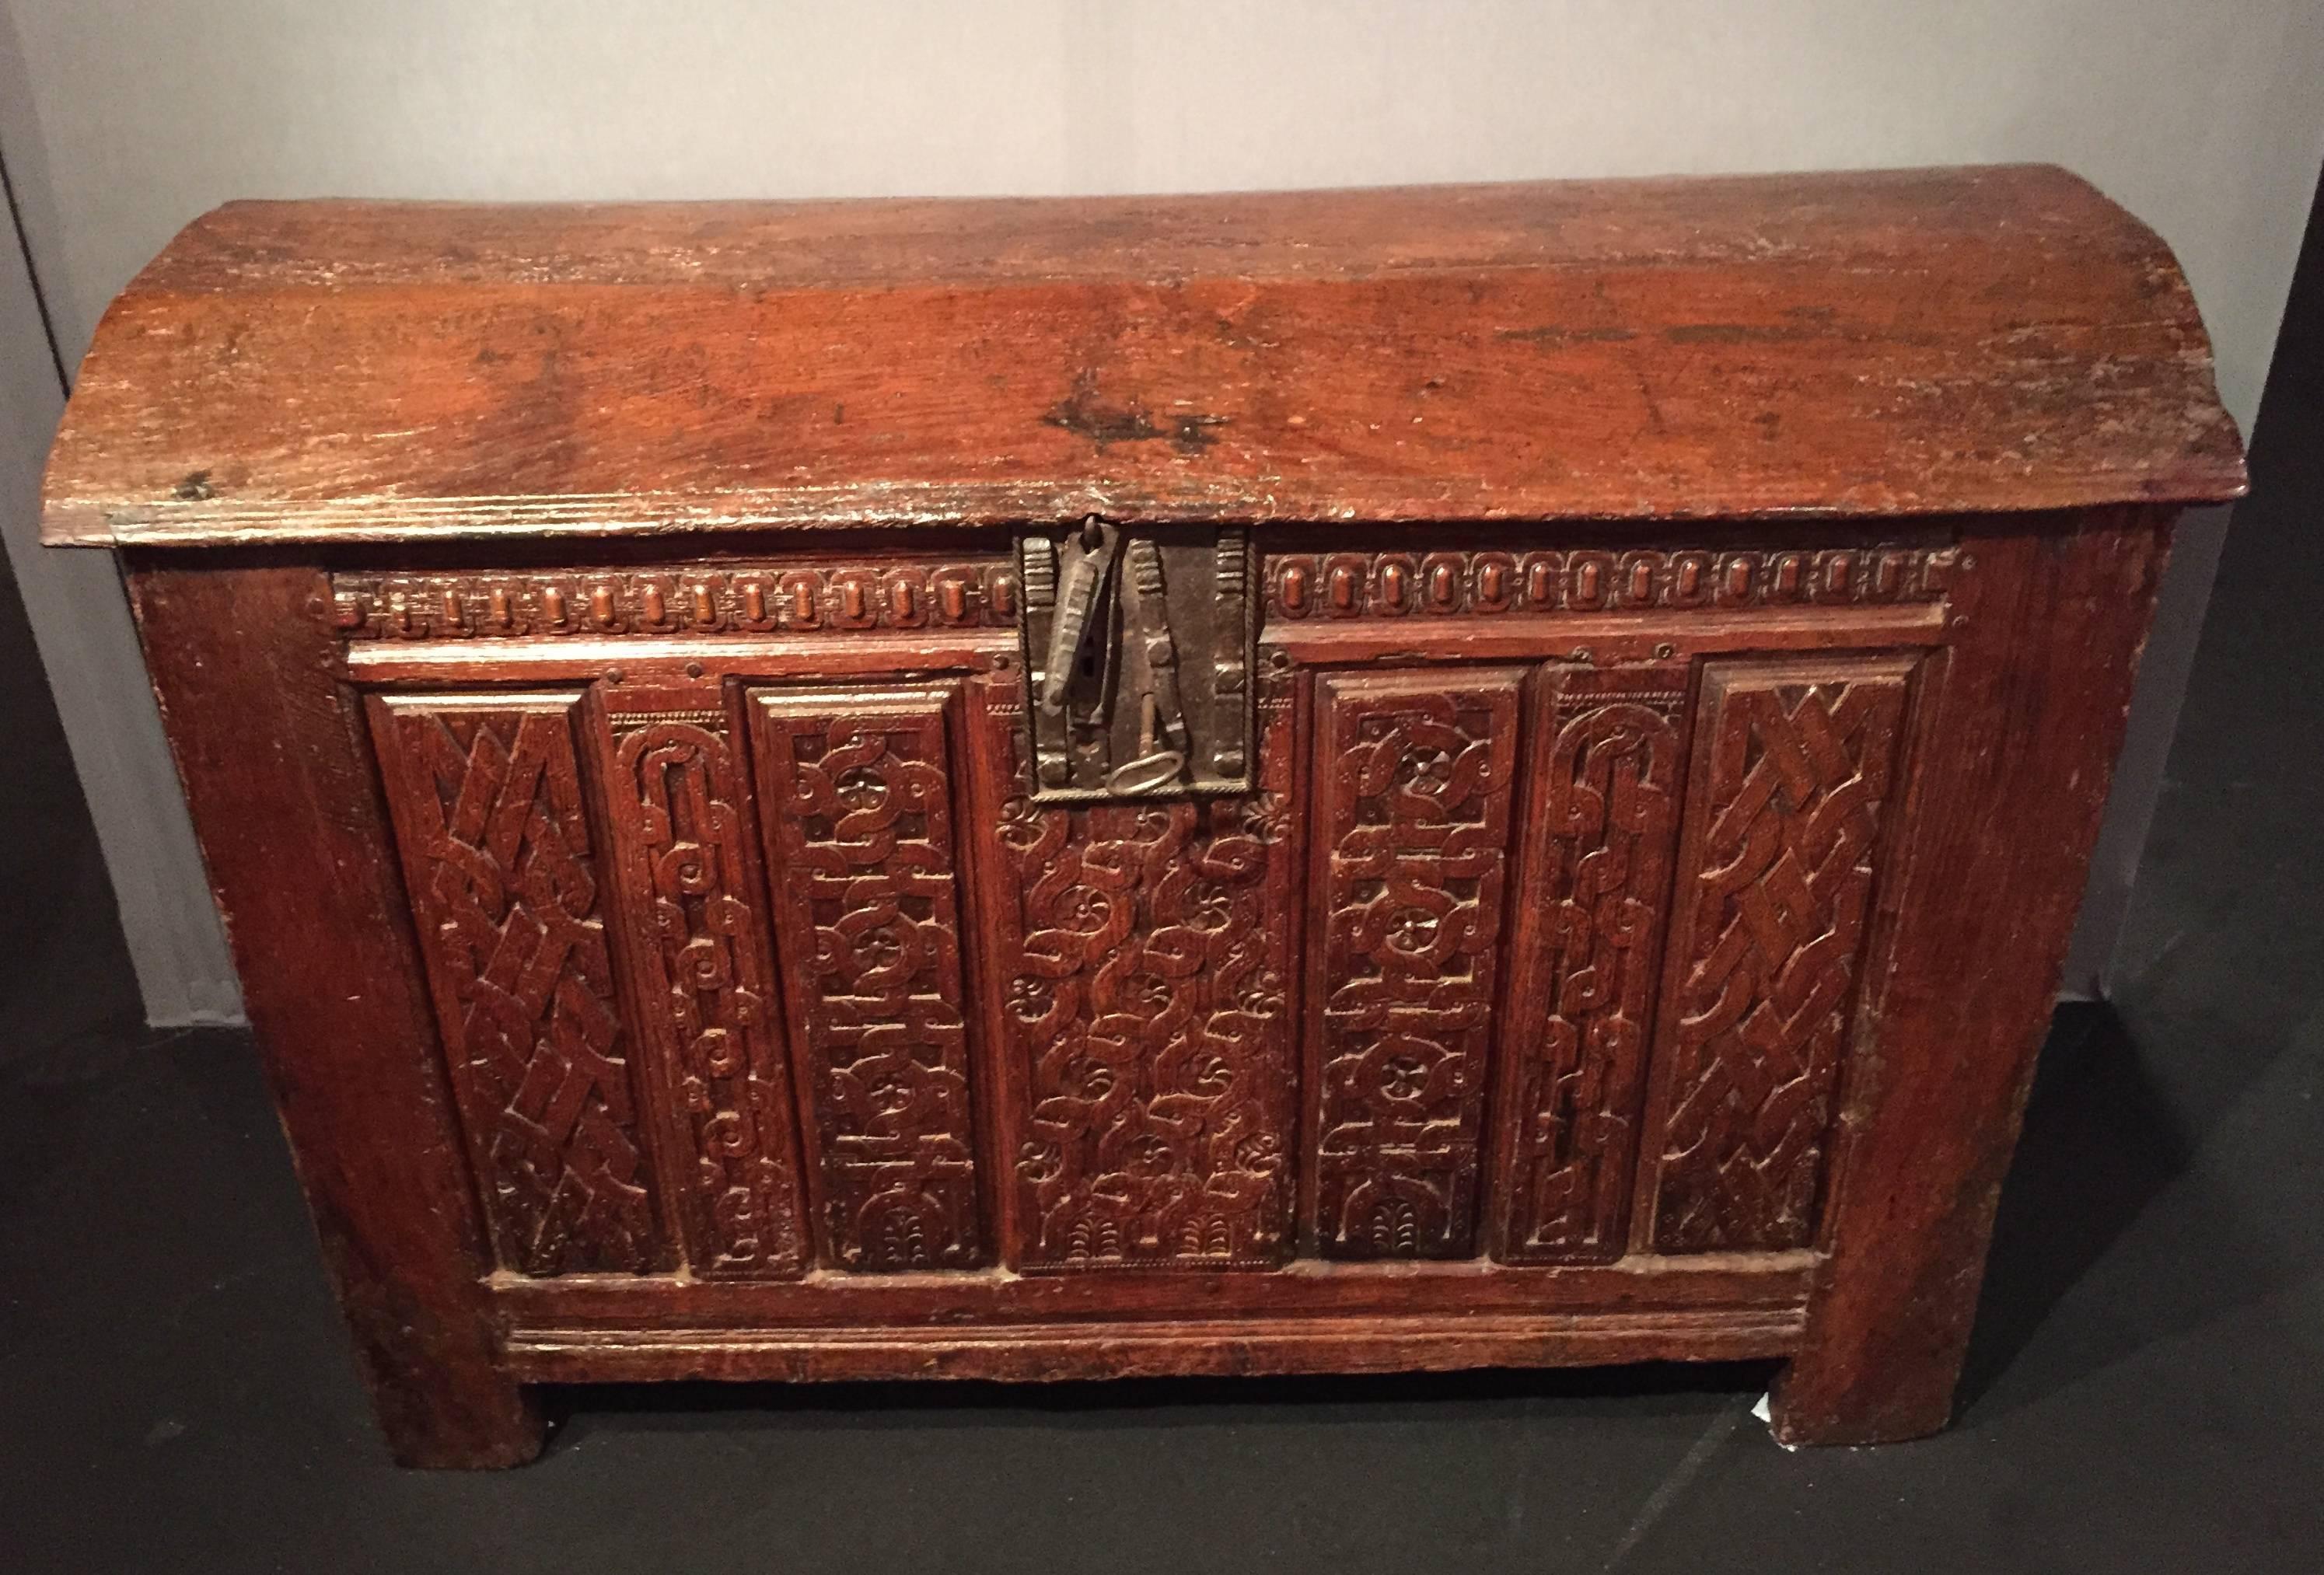 French Renaissance Oak Coffre Circa 1580
Rare safe renaissance arched top in solid oak.
The facade consists of four panels and three cross intricately carved complex geometric tracery, inlaid flowers and punched stars.
Listed on both